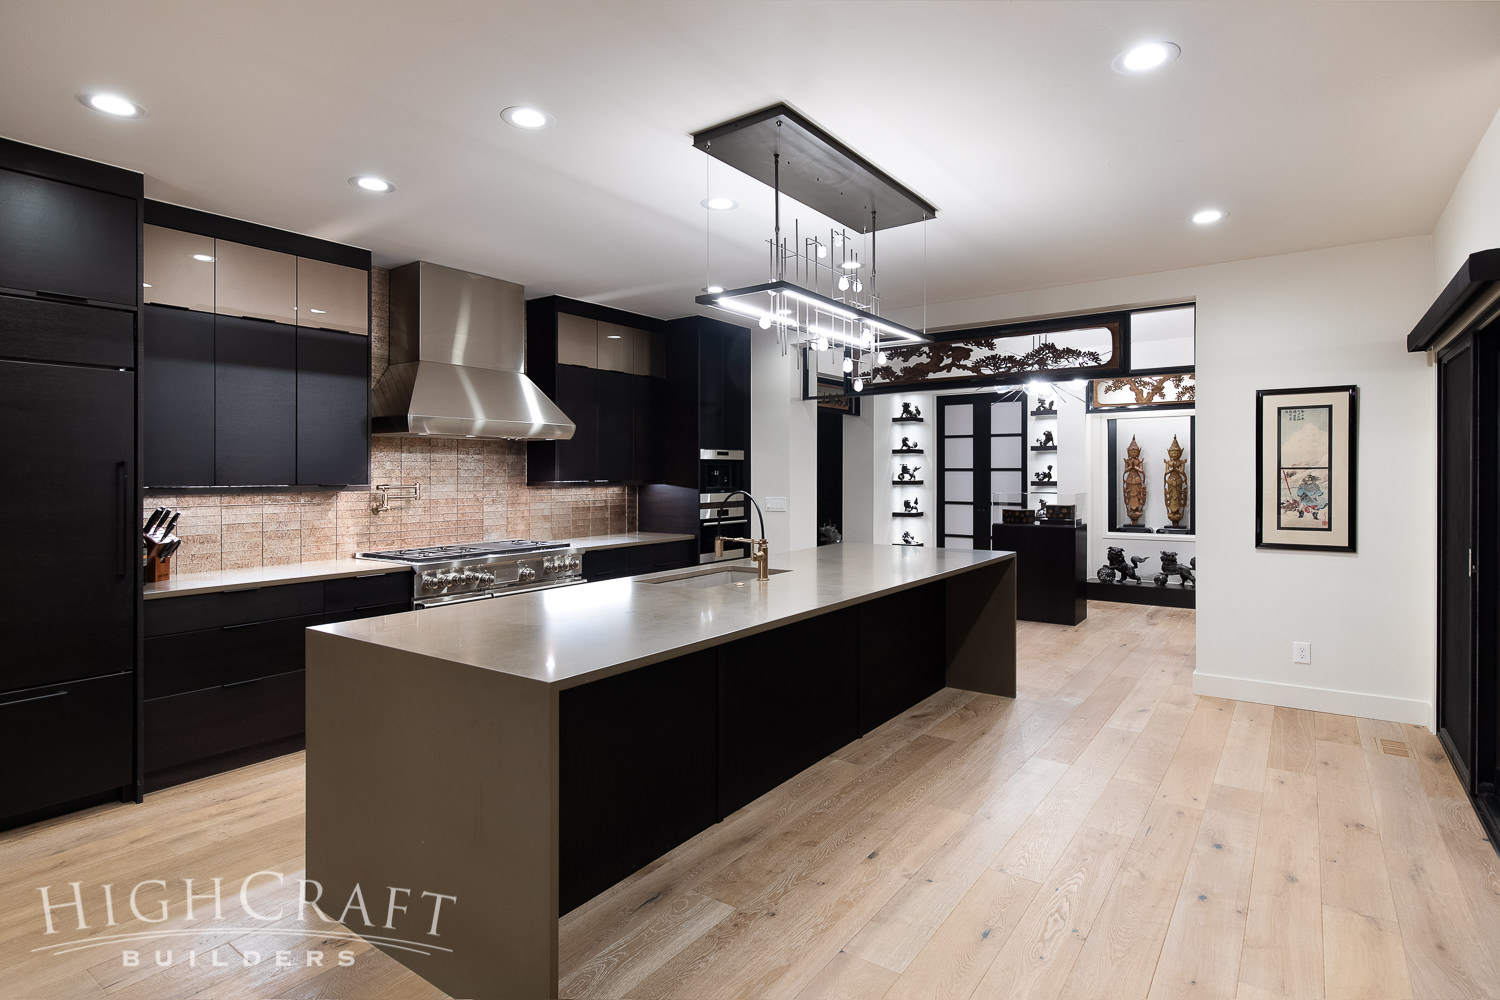 kitchen_and_remodeling_quartz_countertop_waterfall_edge_island_slab_front_black_cabinetry